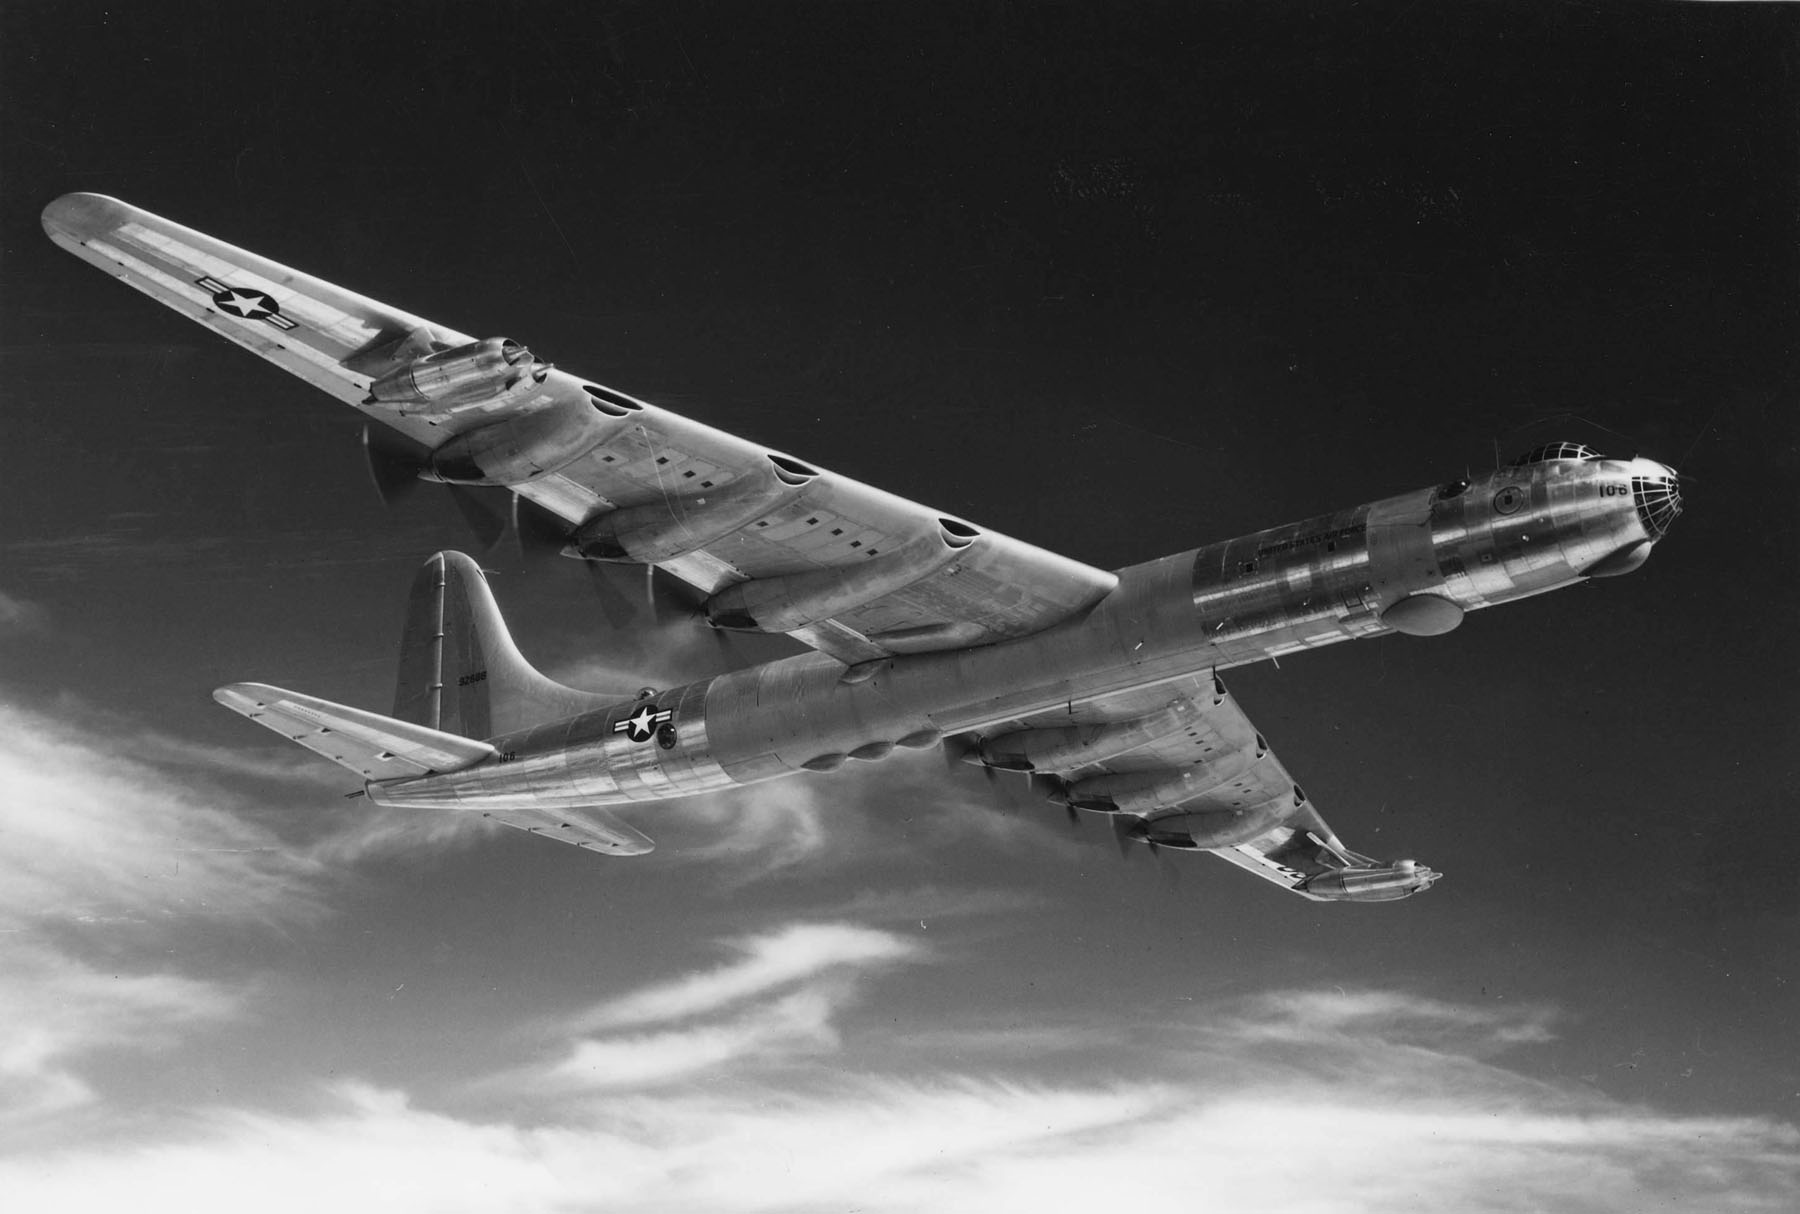 This Convair RB-36D-5-CF, 49-2686, is similar in appearance to the B-36H used in Operation Teapot HA. (U.S. Air Force)